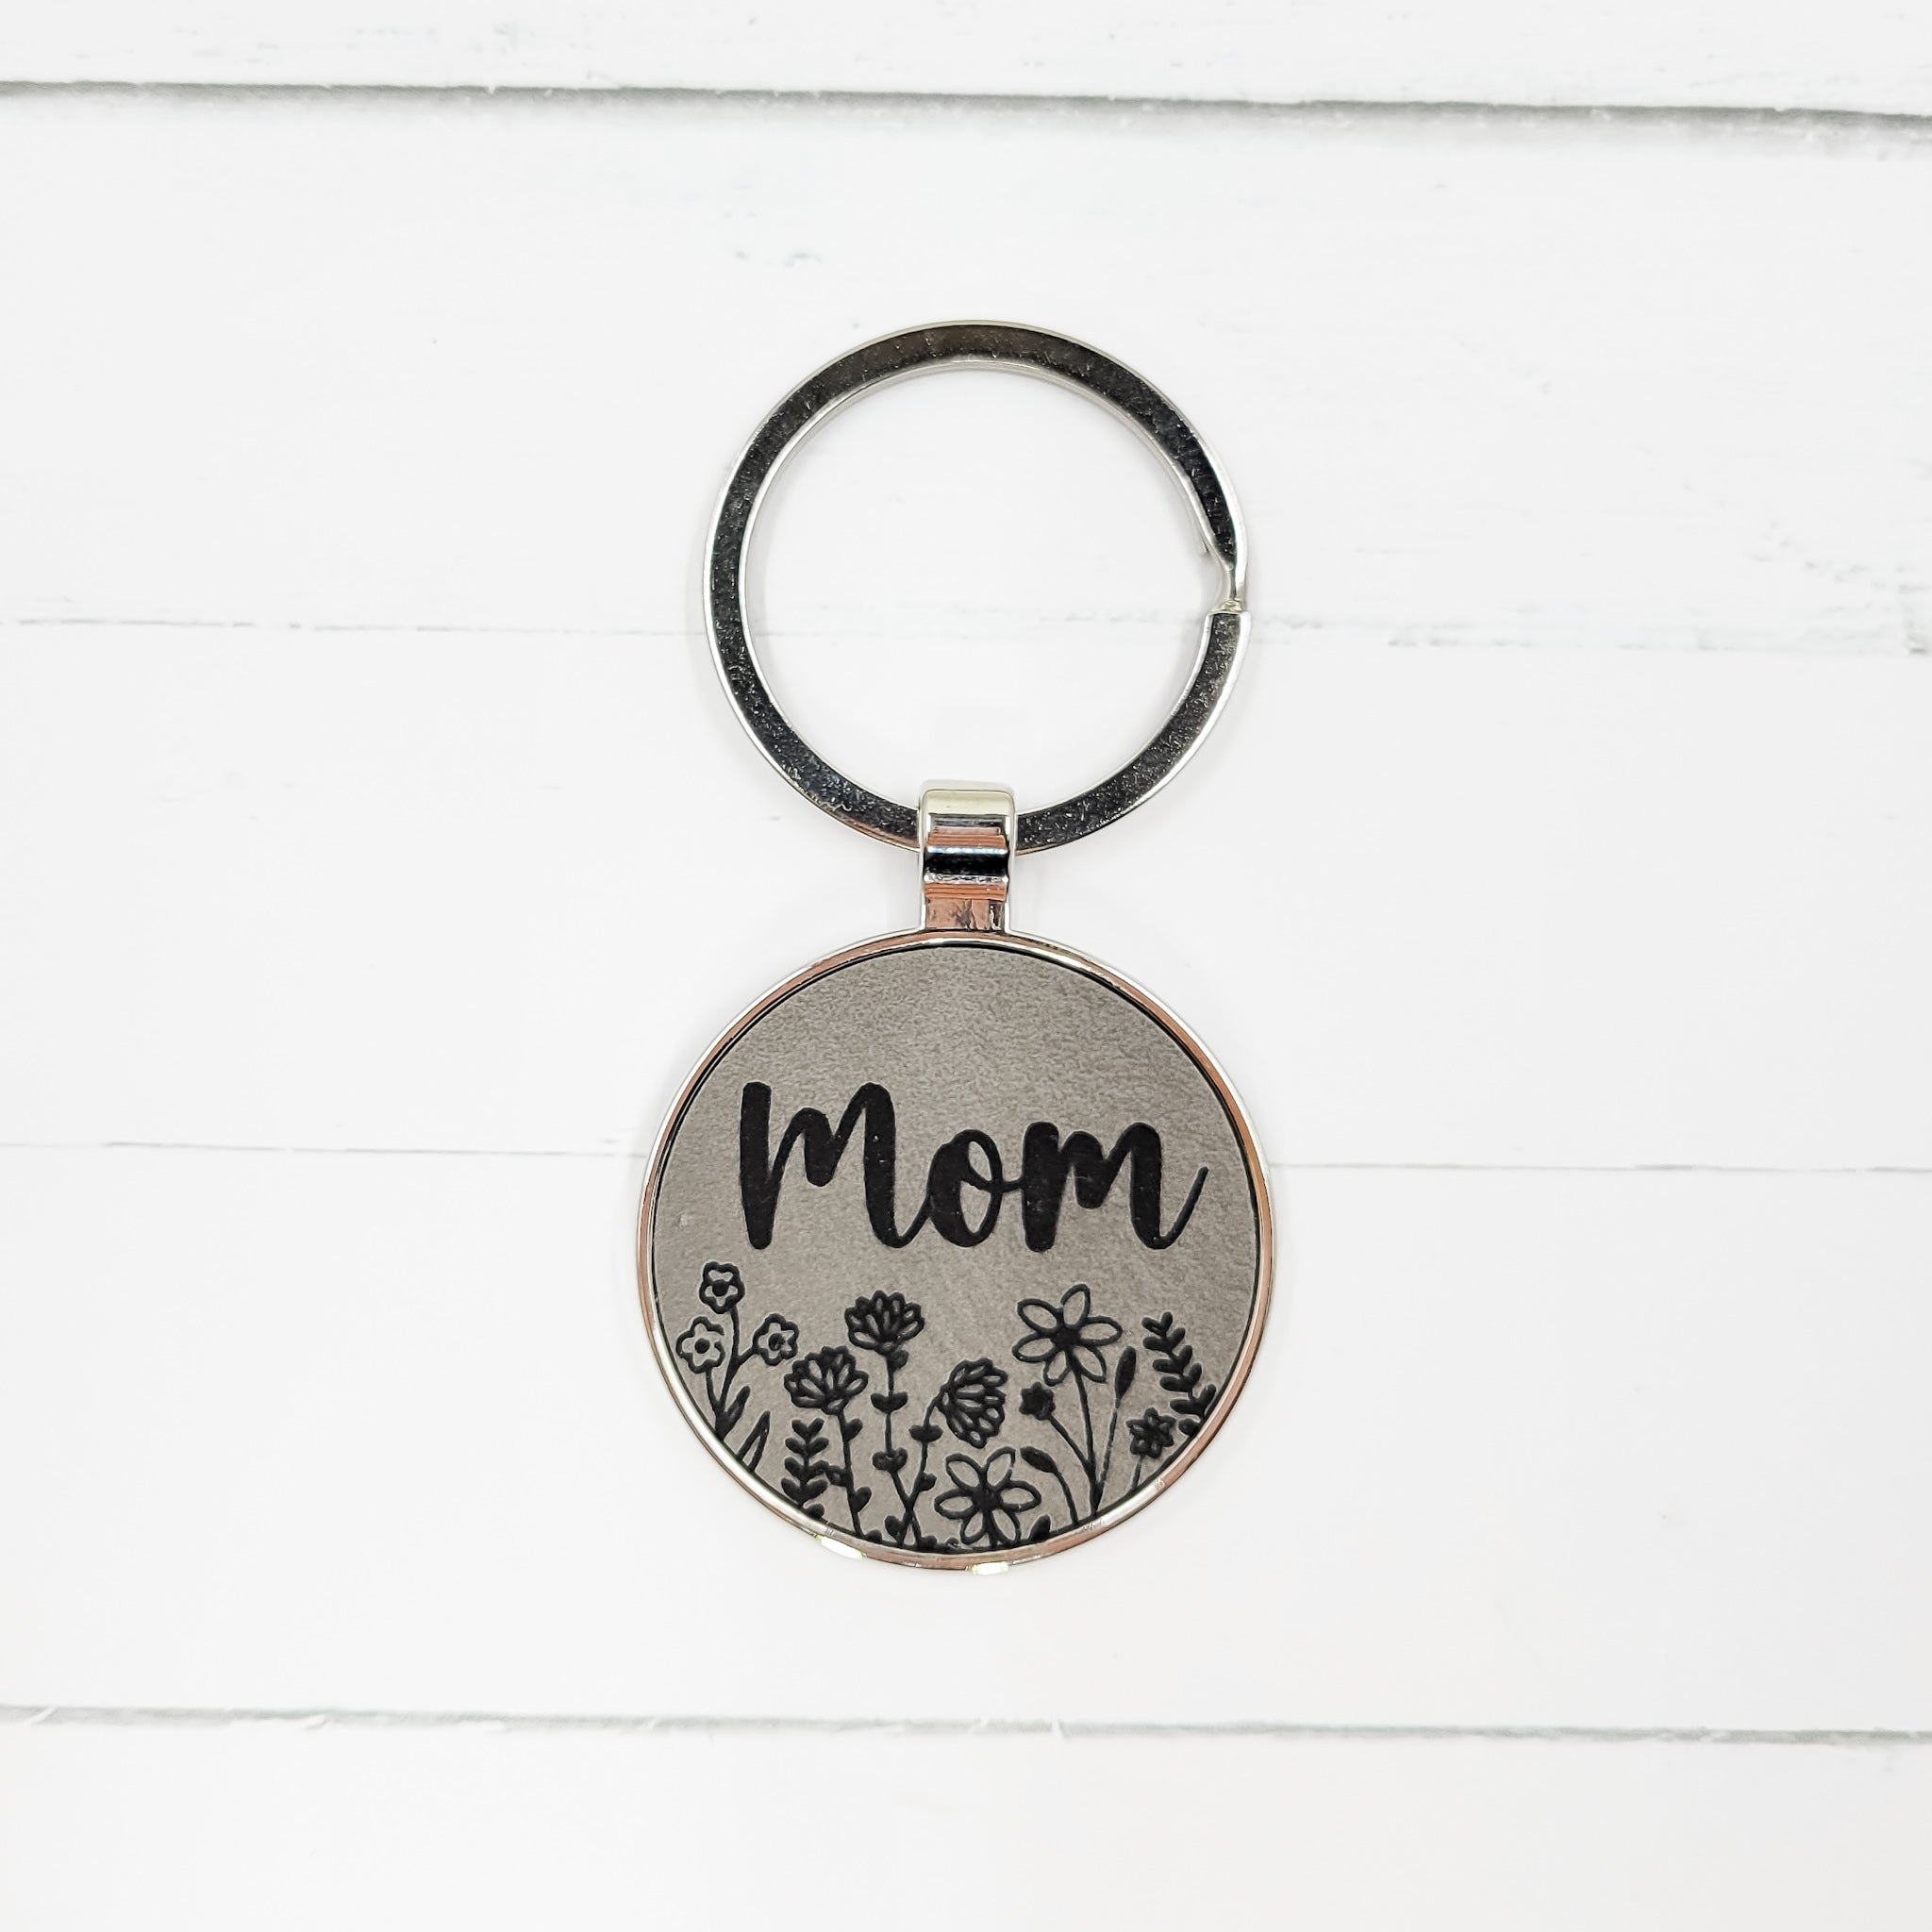 "Mom" Floral Grey Engraved Leatherette Keychain